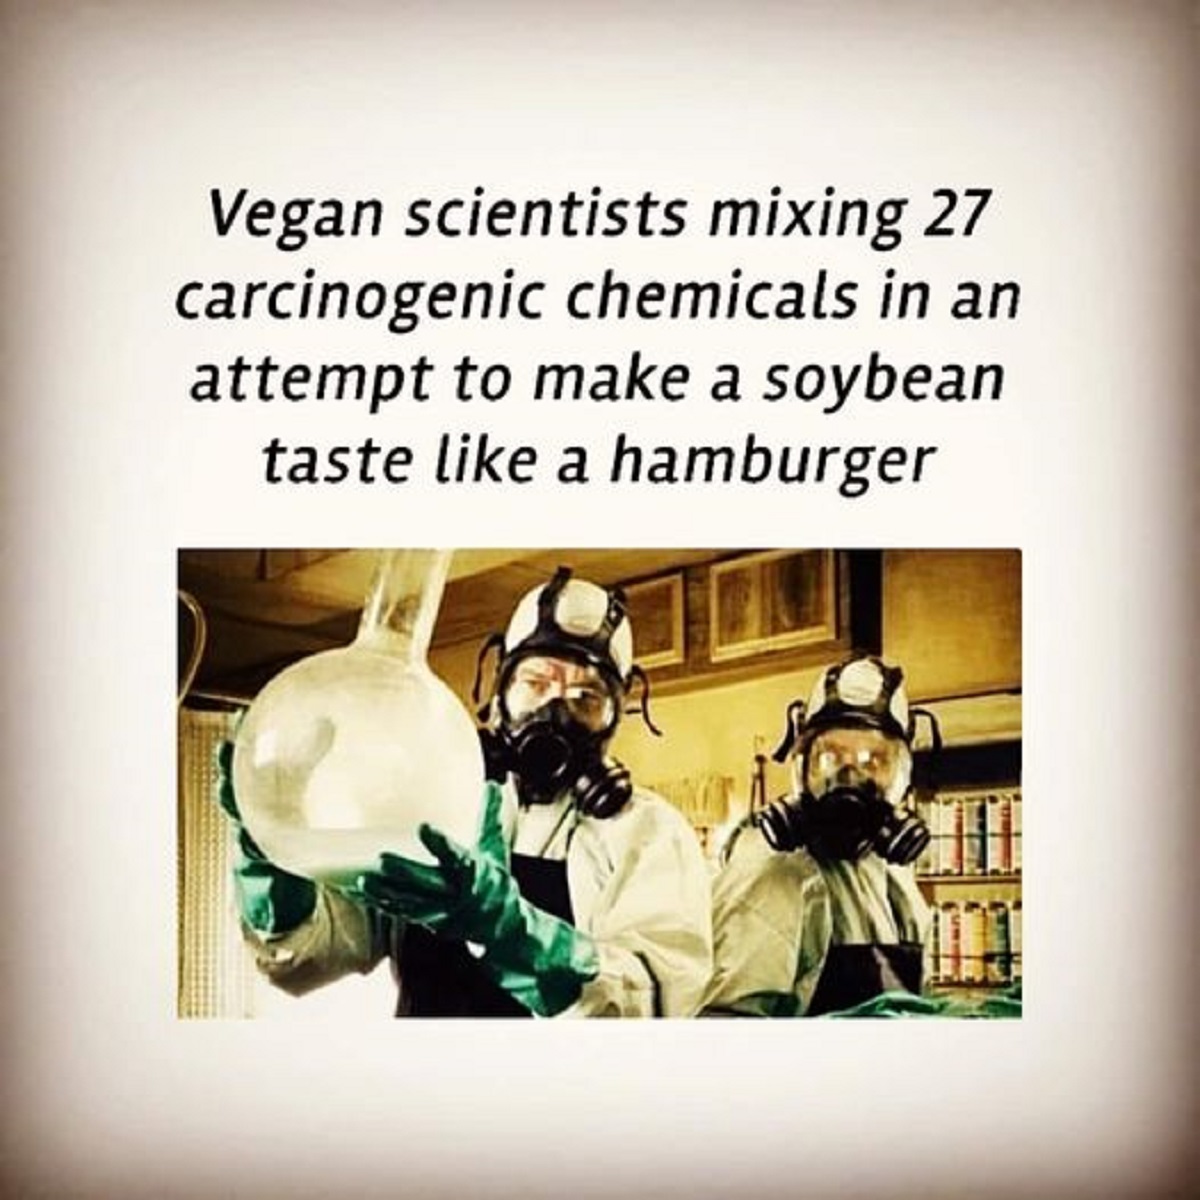 photo caption - Vegan scientists mixing 27 carcinogenic chemicals in an attempt to make a soybean taste a hamburger Wat